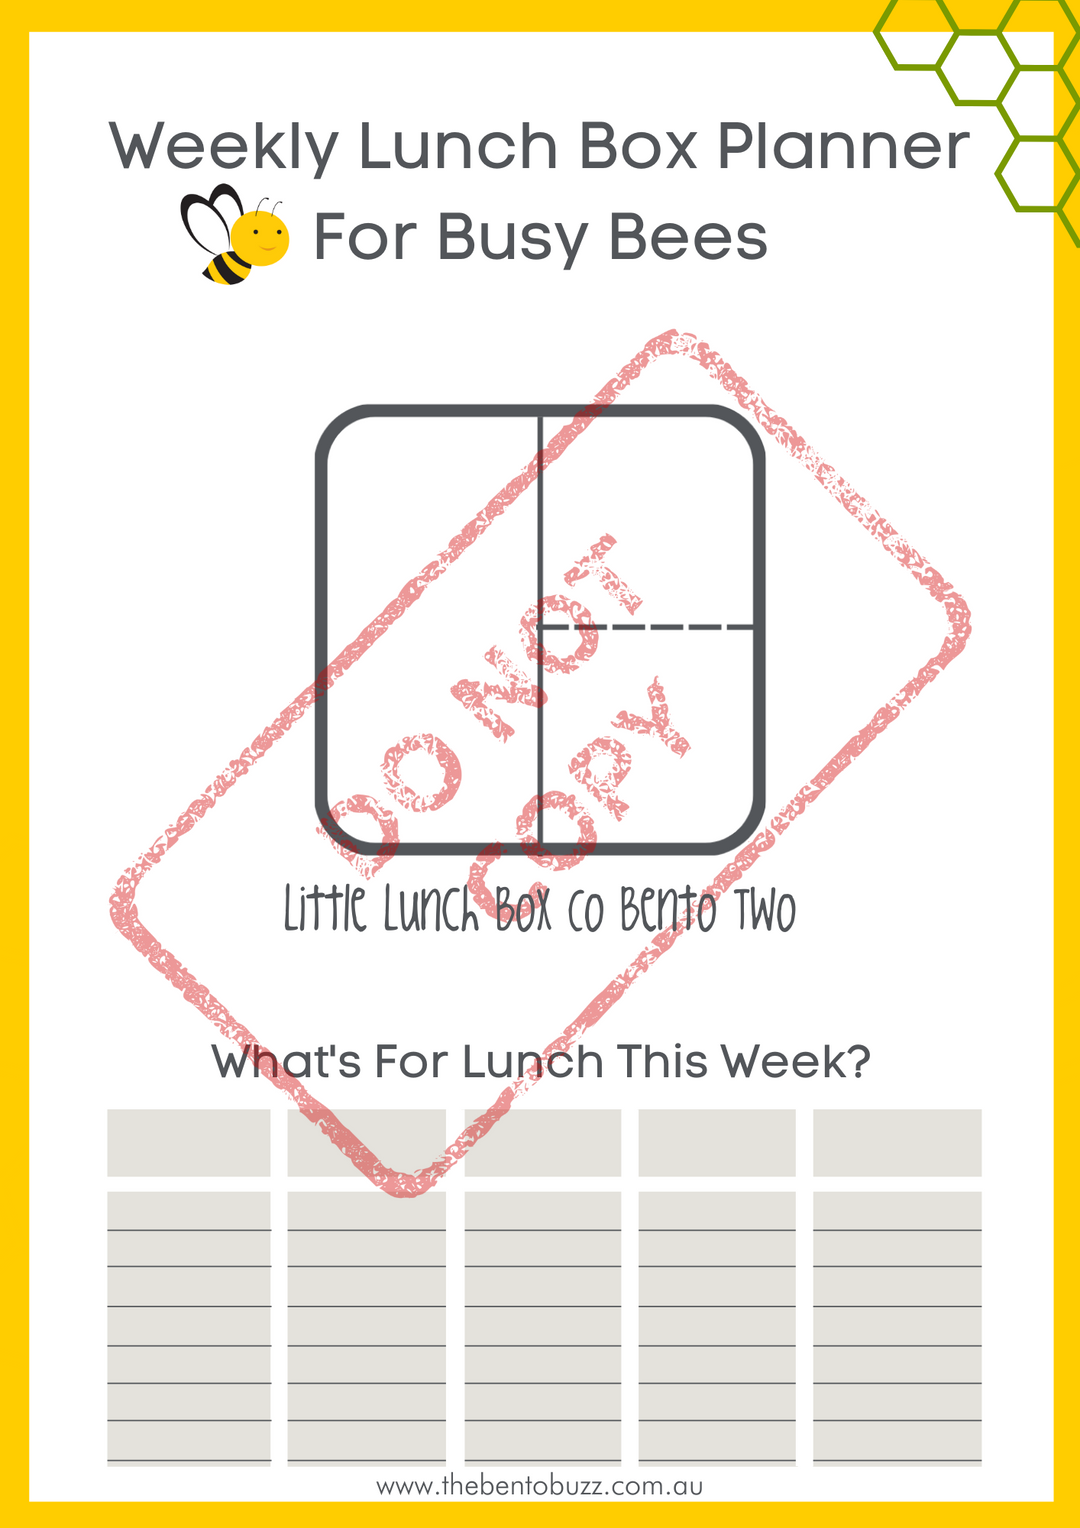 Download & Print Lunch Box Planner - Little Lunch Box Co Bento Two